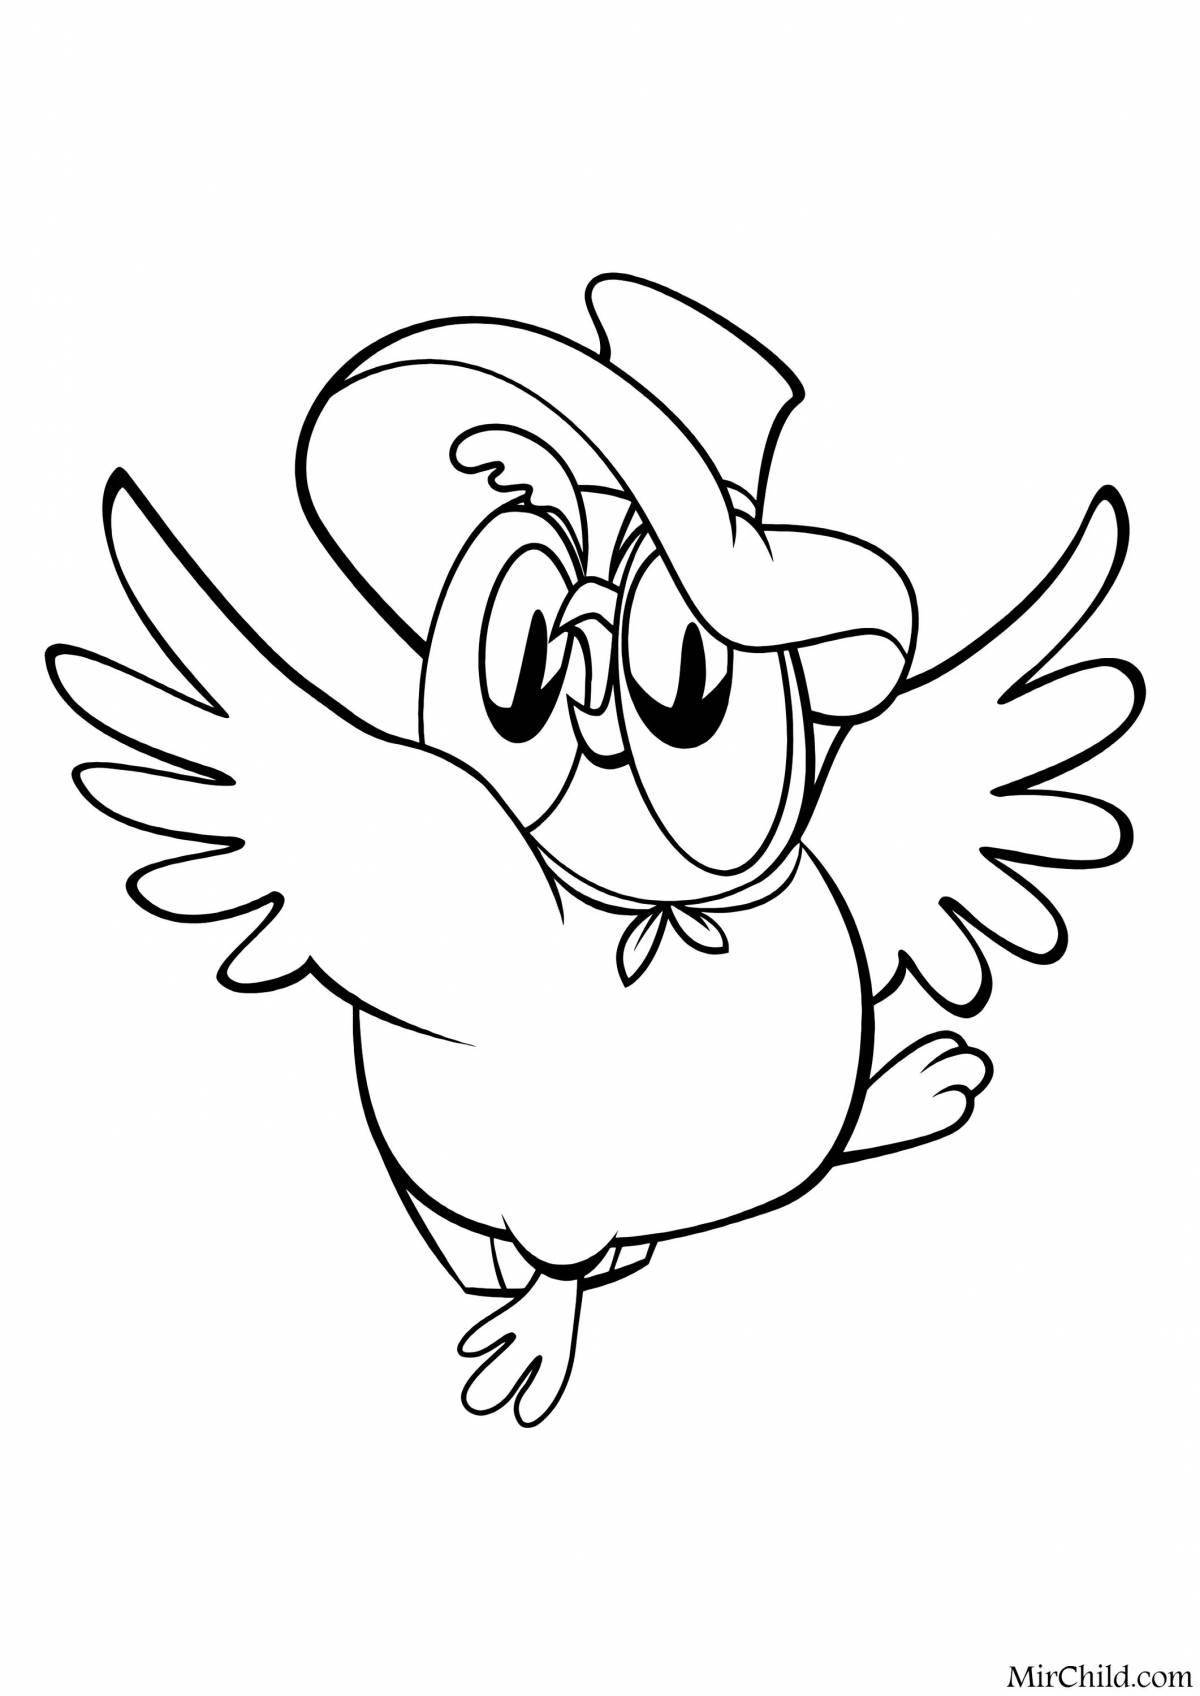 Unique winnie the pooh owl coloring page